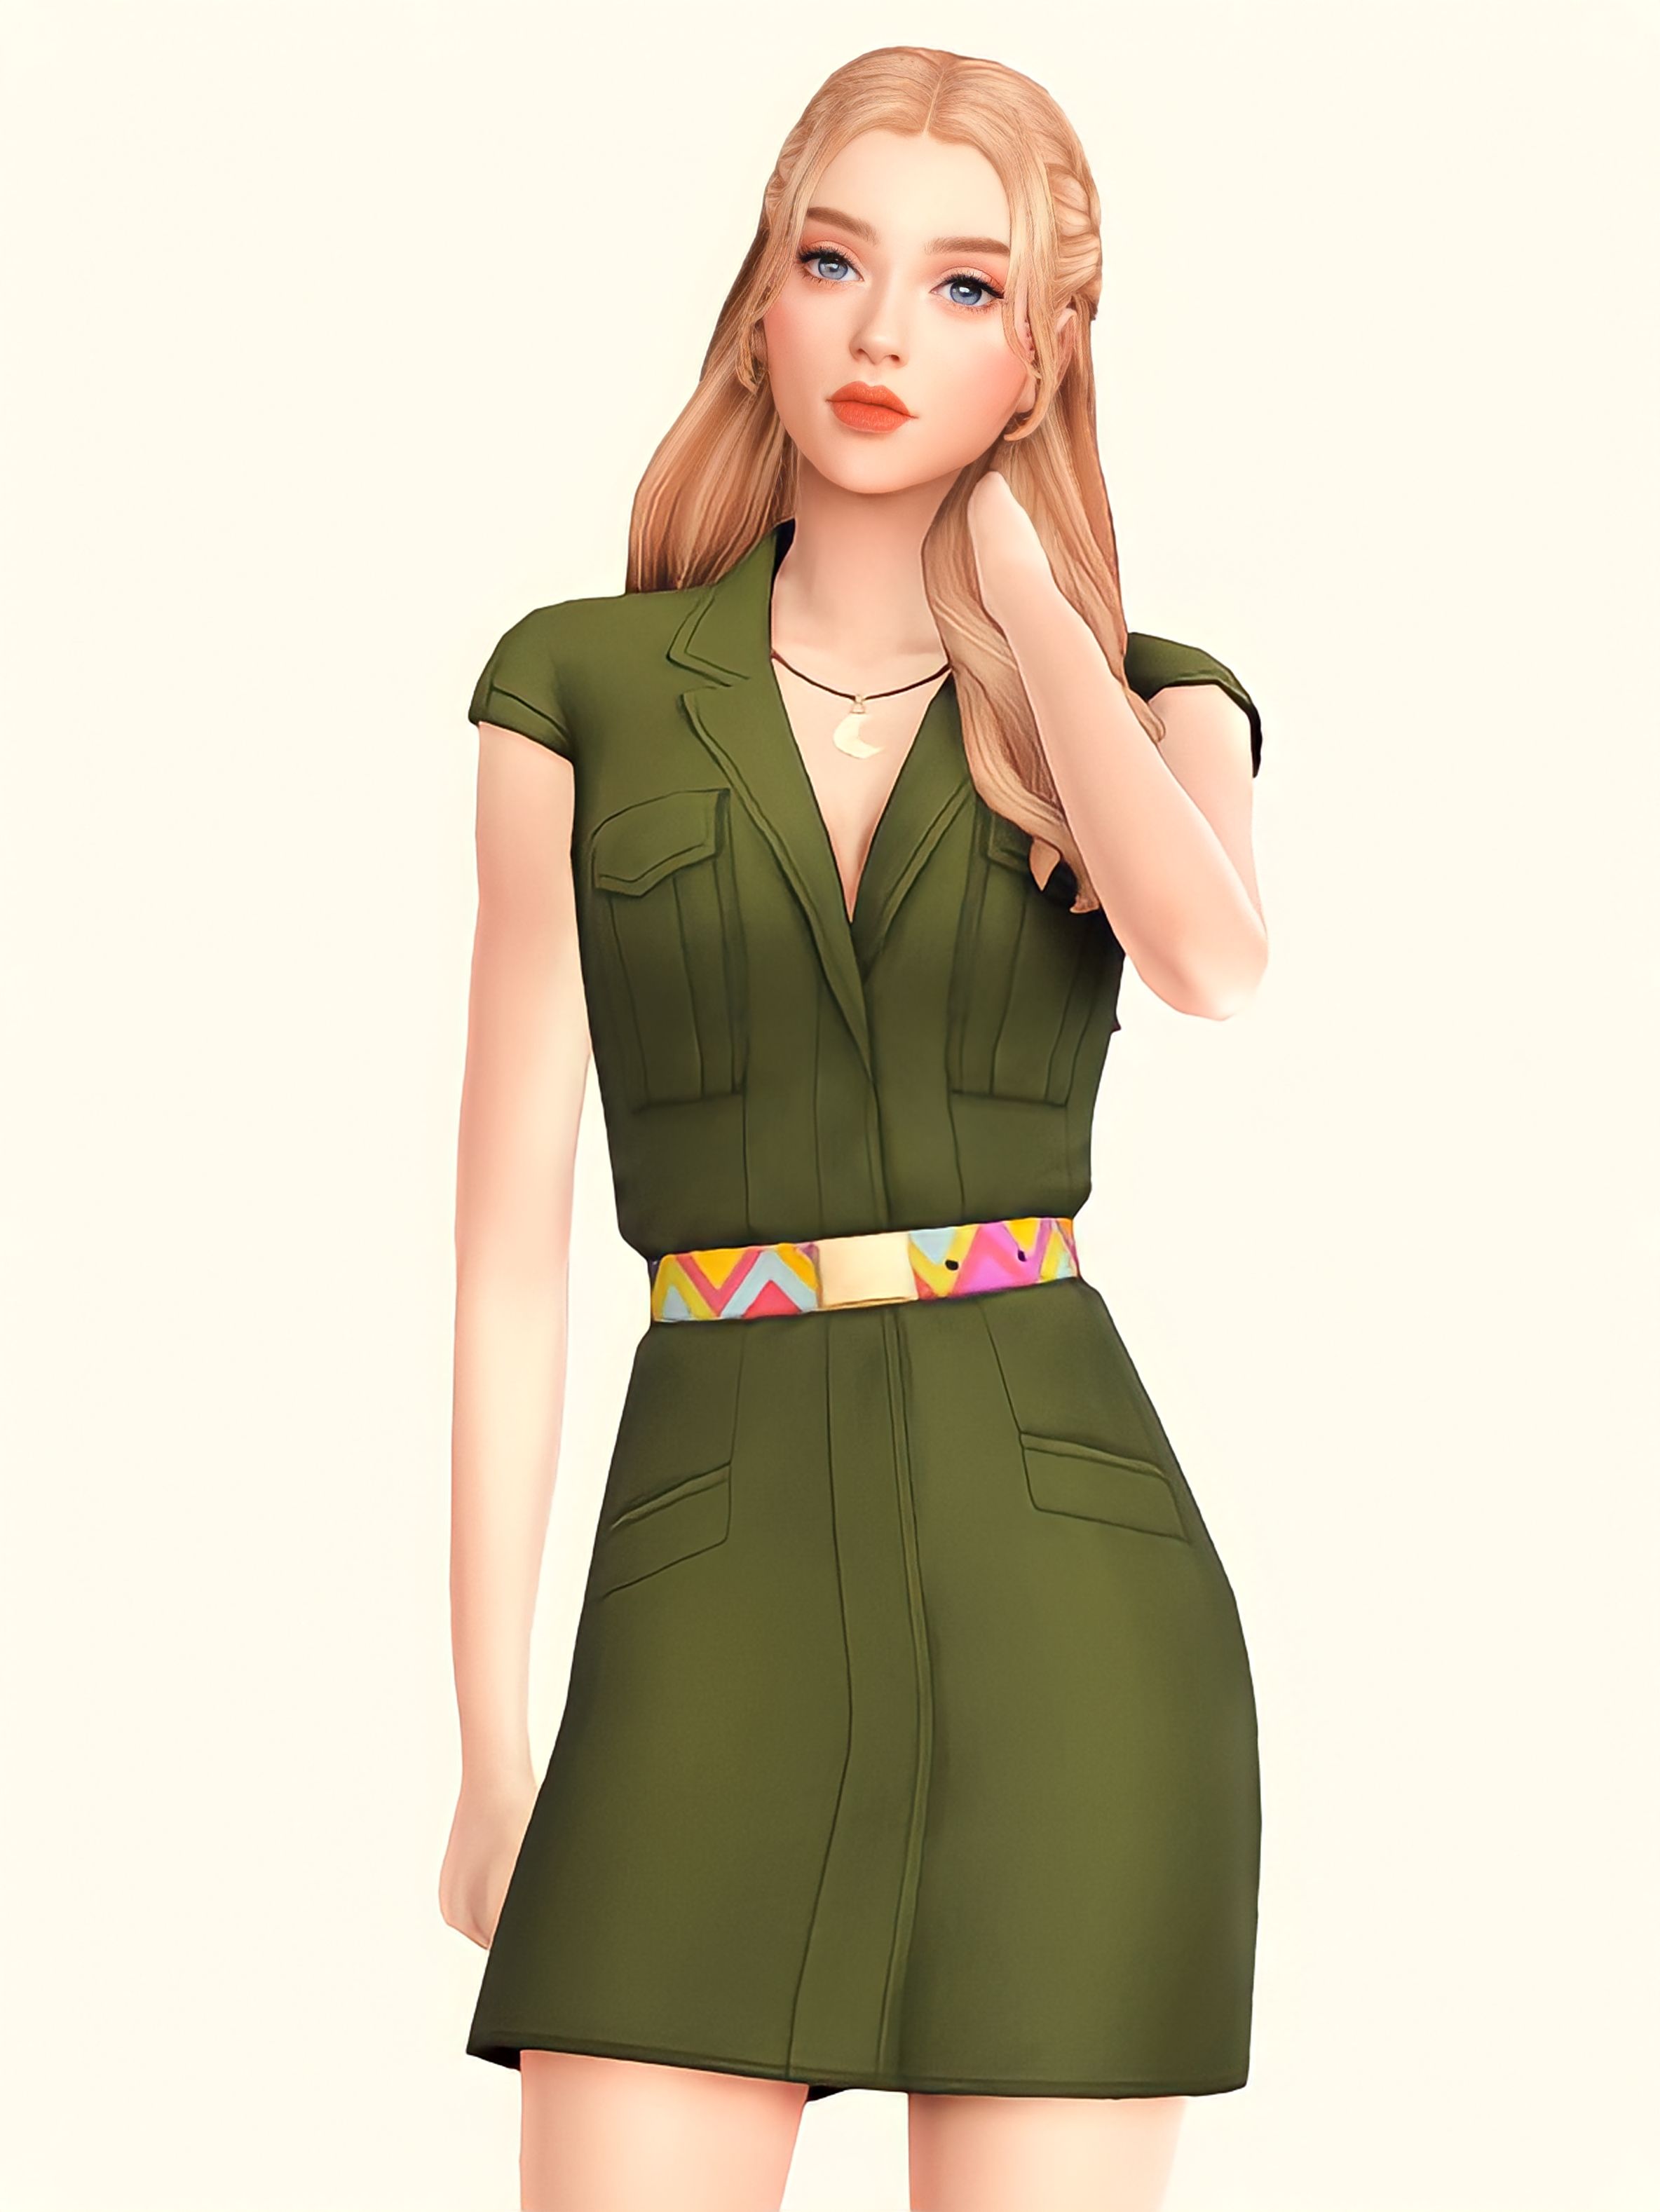 Candice Browne - Screenshots - The Sims 4 Sims / Households - CurseForge